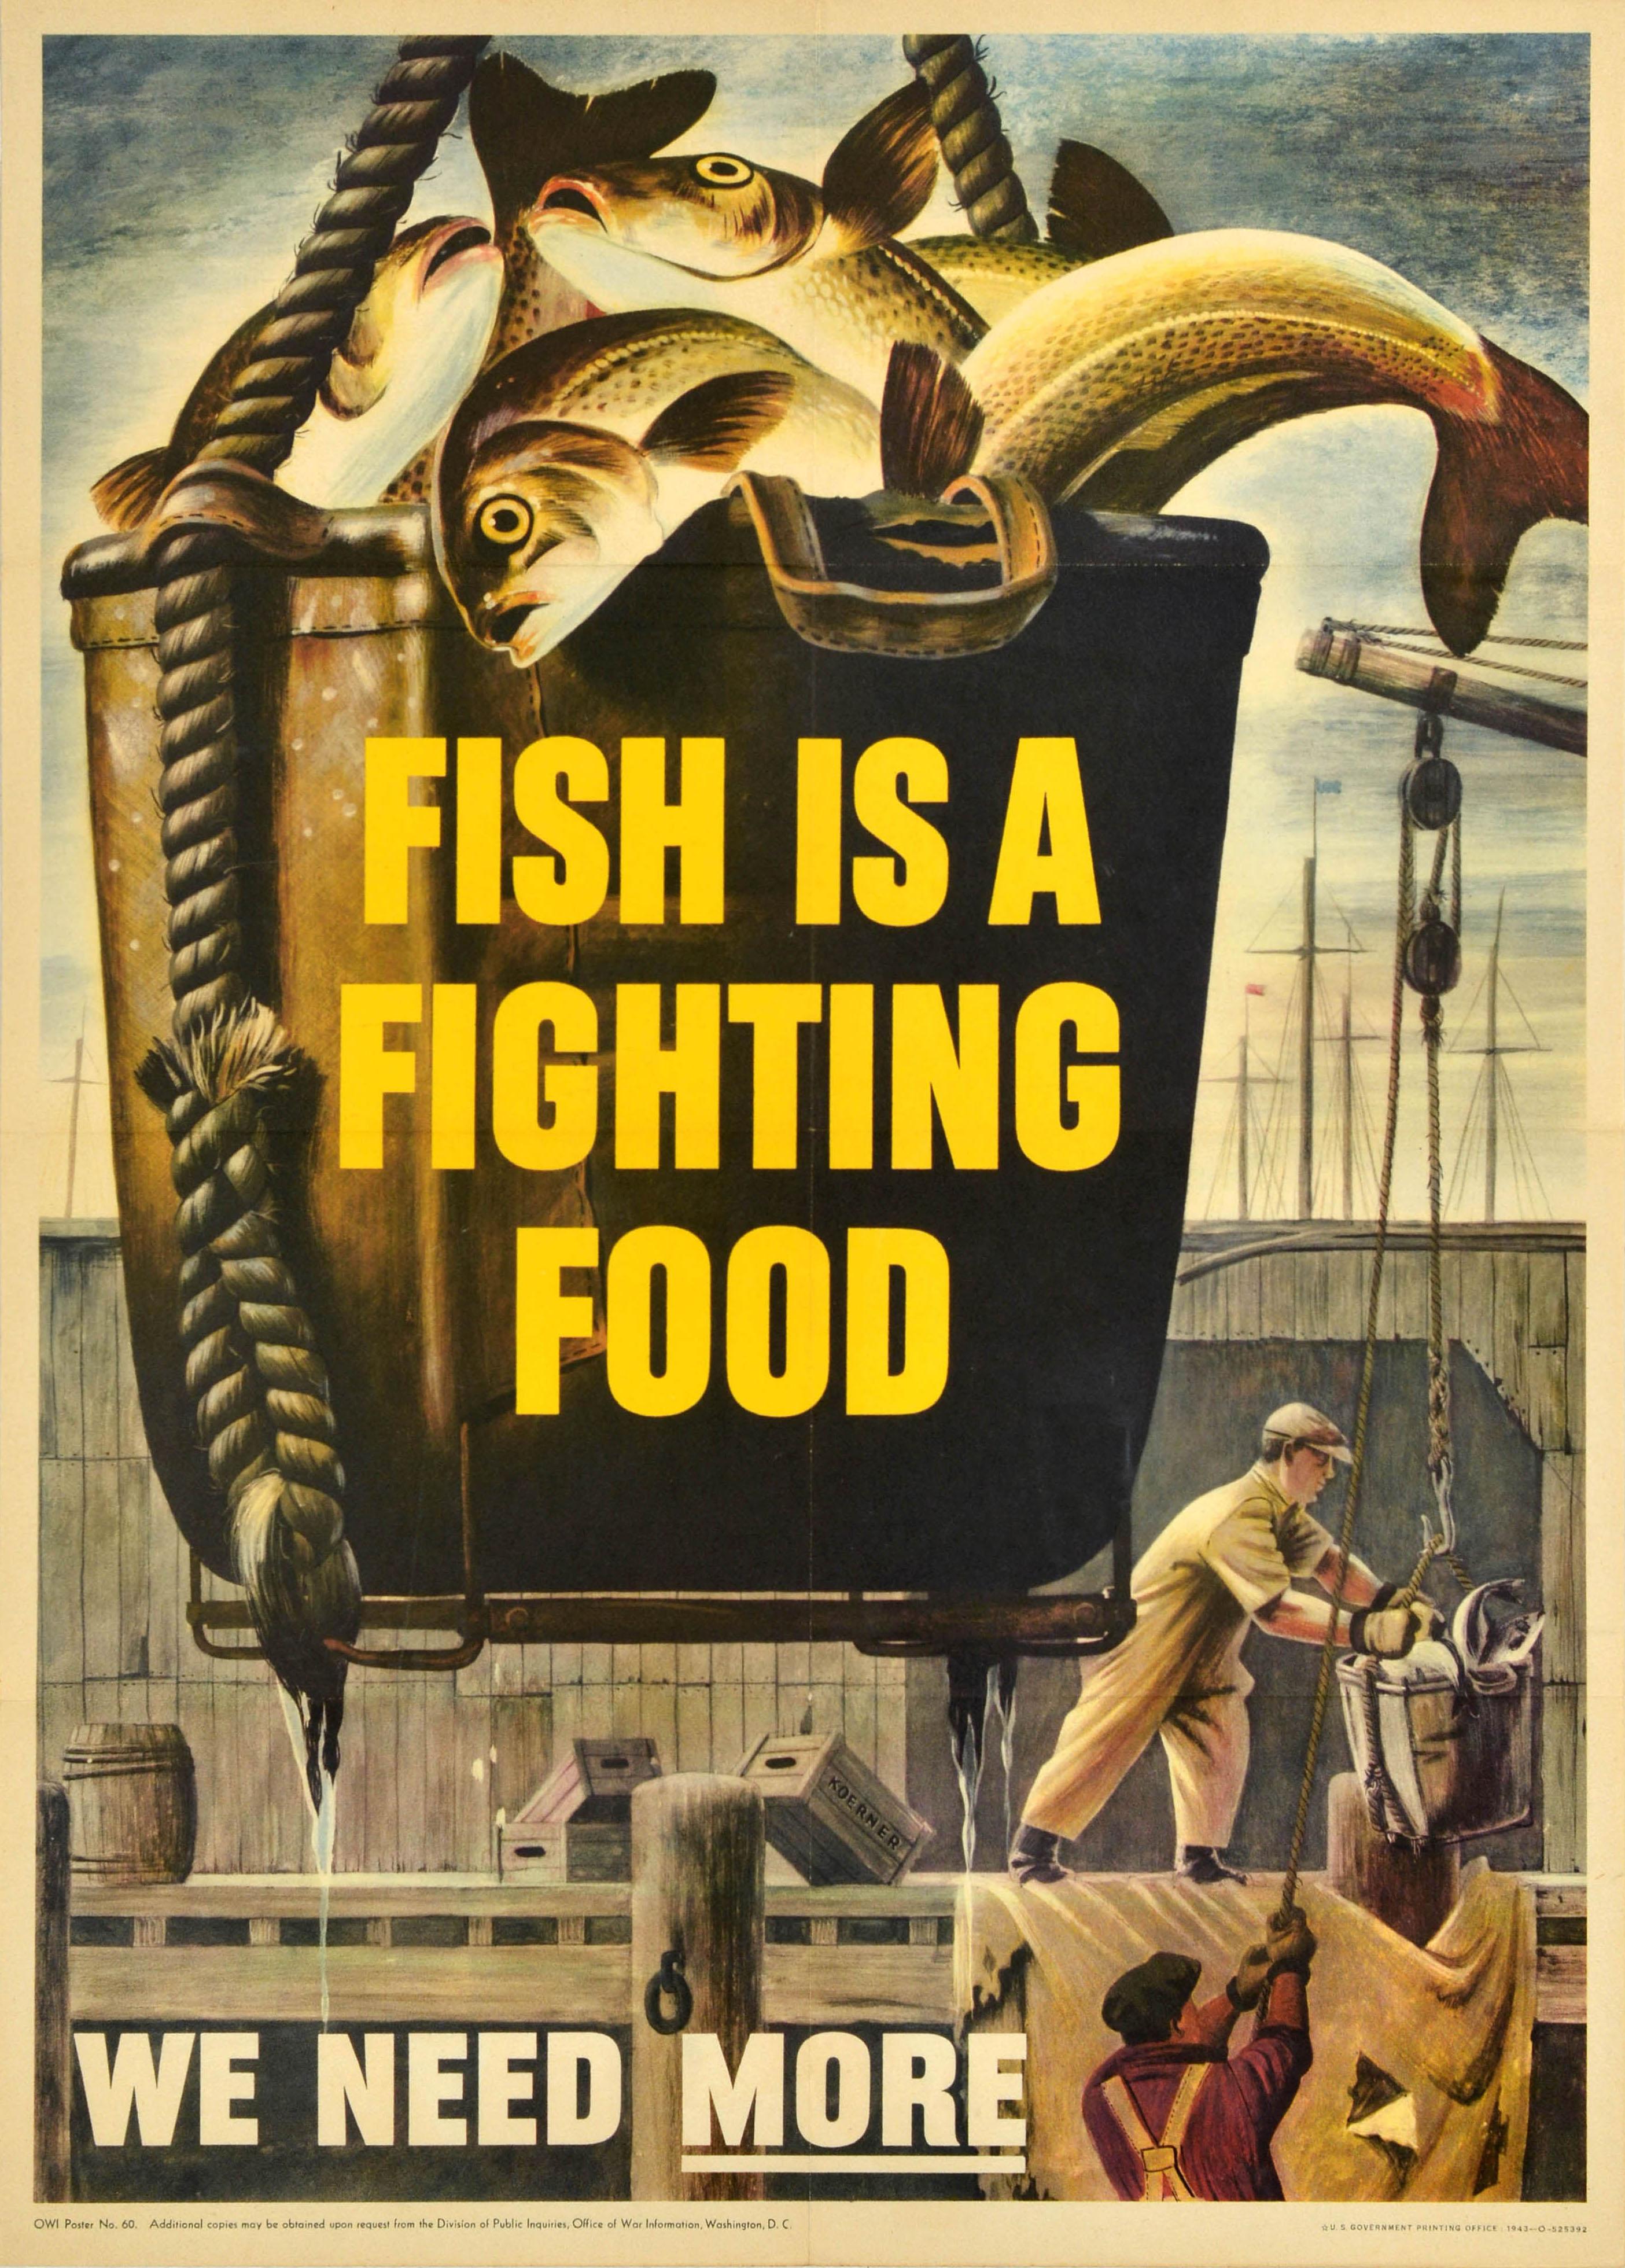 Unknown Print - Original Vintage War Home Front Poster Fish Is A Fighting Food Rationing WWII